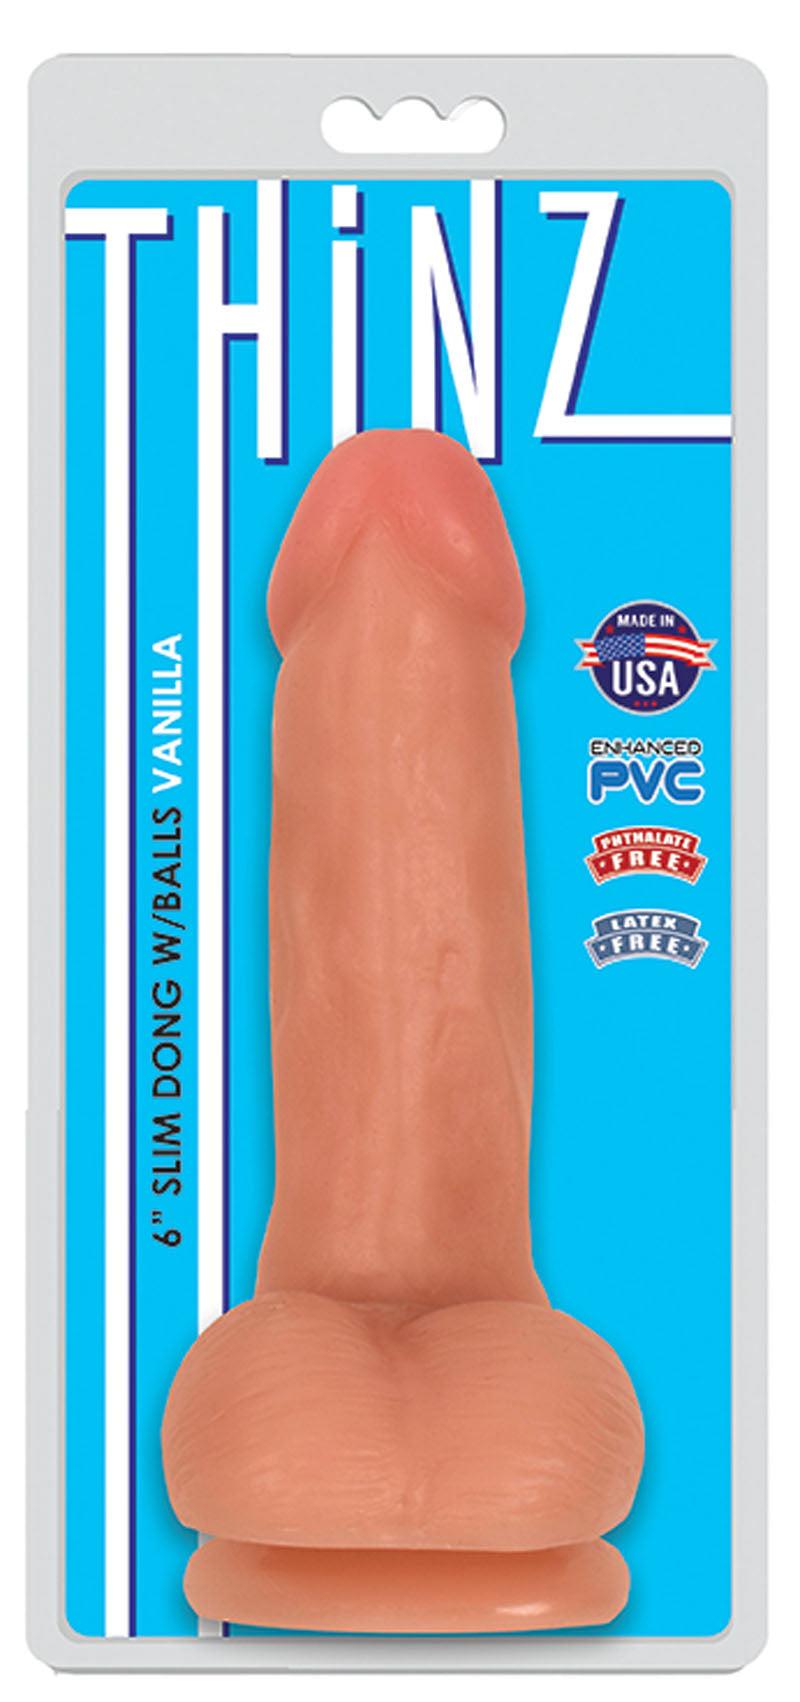 Experience Realistic Pleasure with our Lifelike 6" Slim Dong